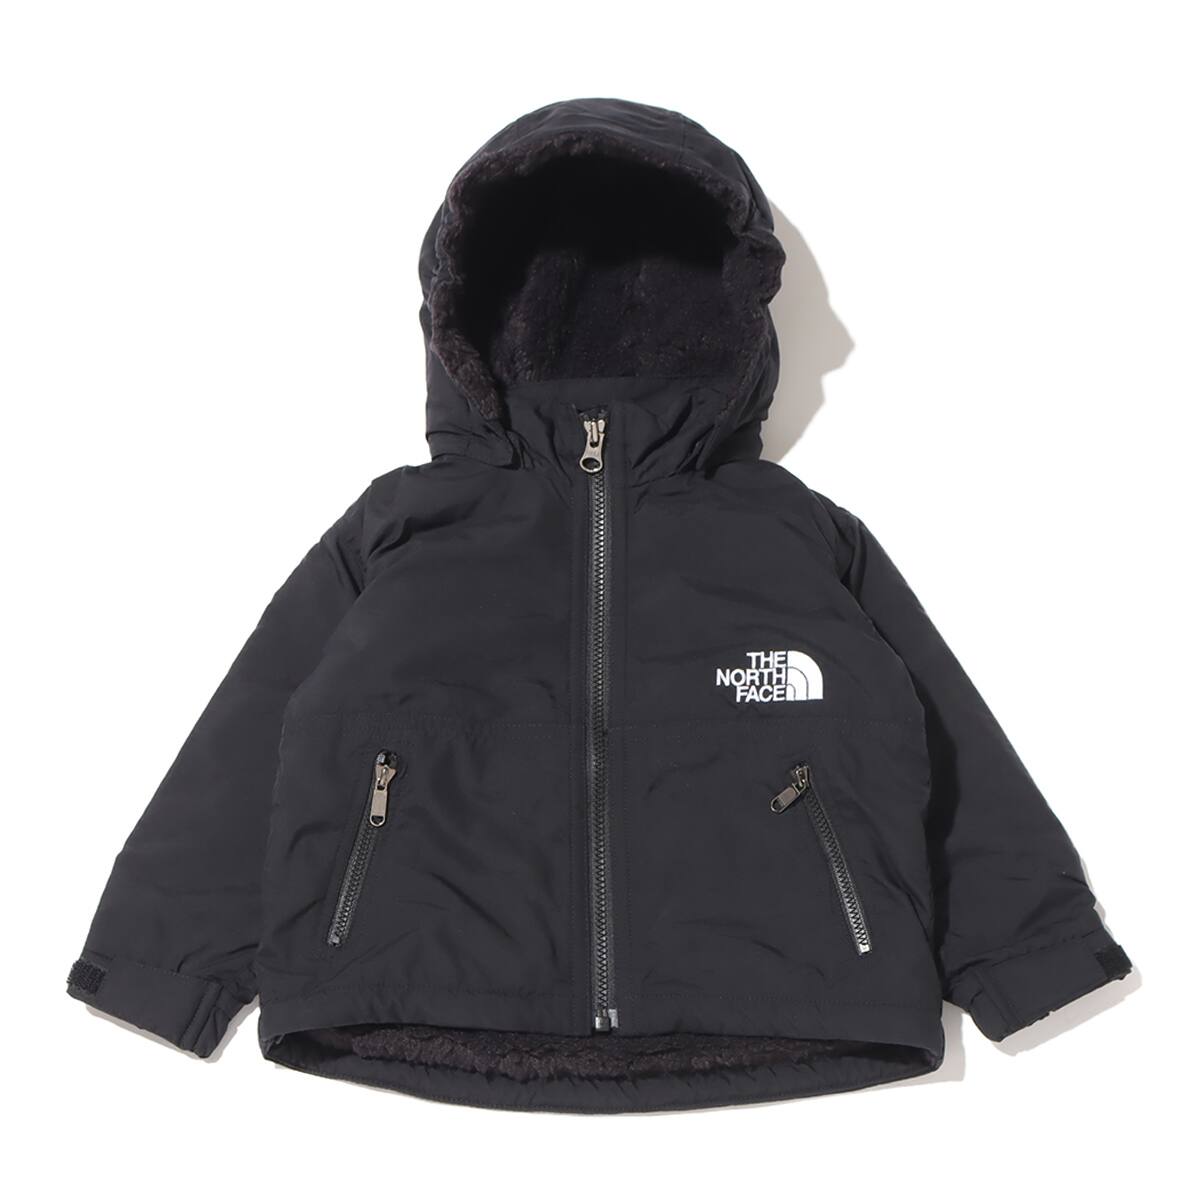 THE NORTH FACE BABY COMPACT NOMAD JACKET BLACK 23FW-I